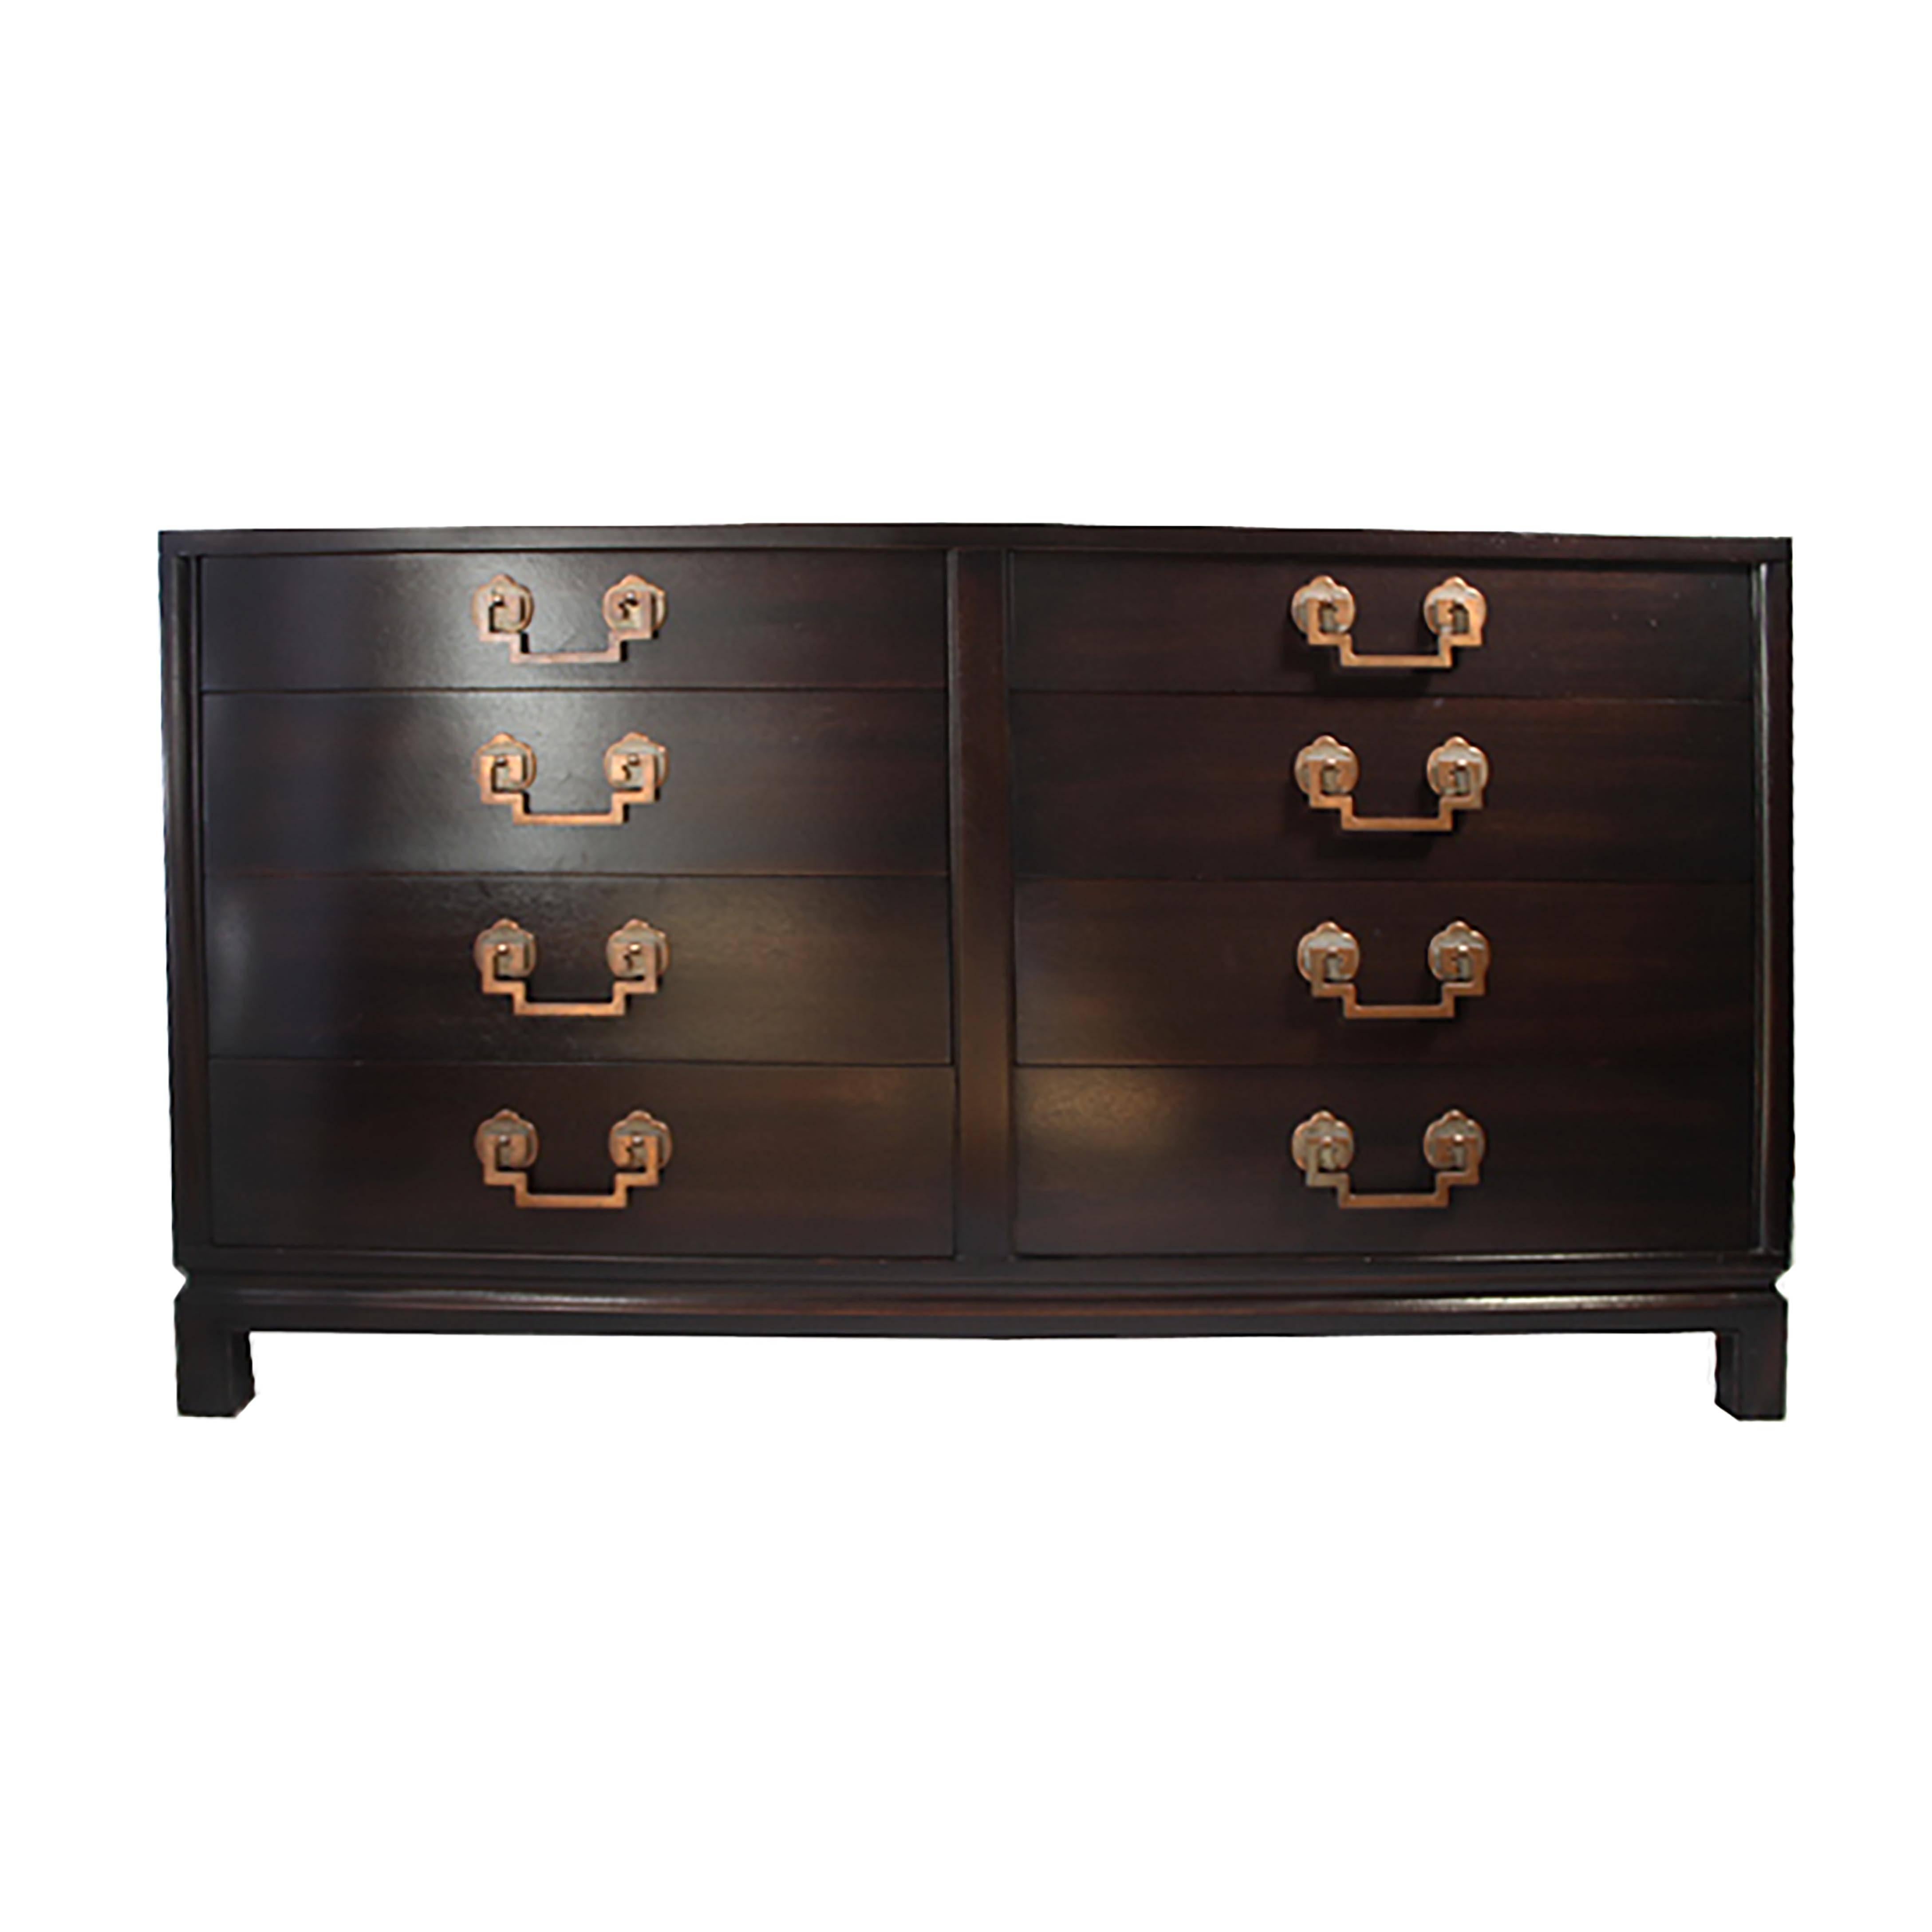 Eight-drawer Asian style dresser manufactured by Landstrom Furniture of Rockford, Illinois. Ribbon mahogany finish, chinoiserie styling with aged copper and nickel drop Greek key pulls.